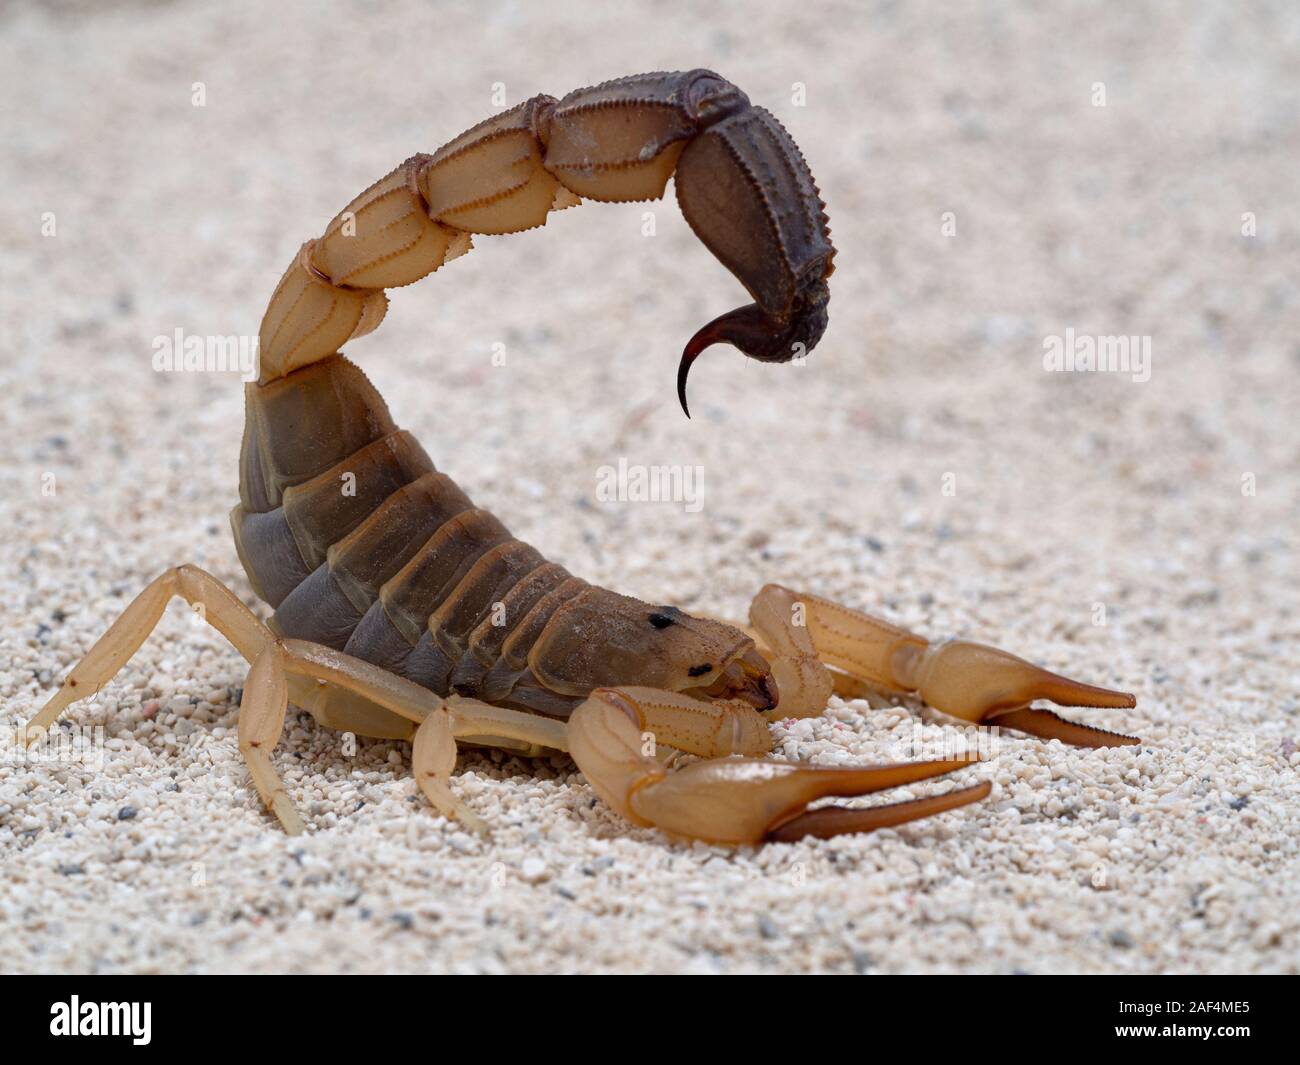 Highly venomous fattail scorpion, Androctonus australis, on sand, side view, closeup. This species from North Africa and the Middle East, is one of th Stock Photo